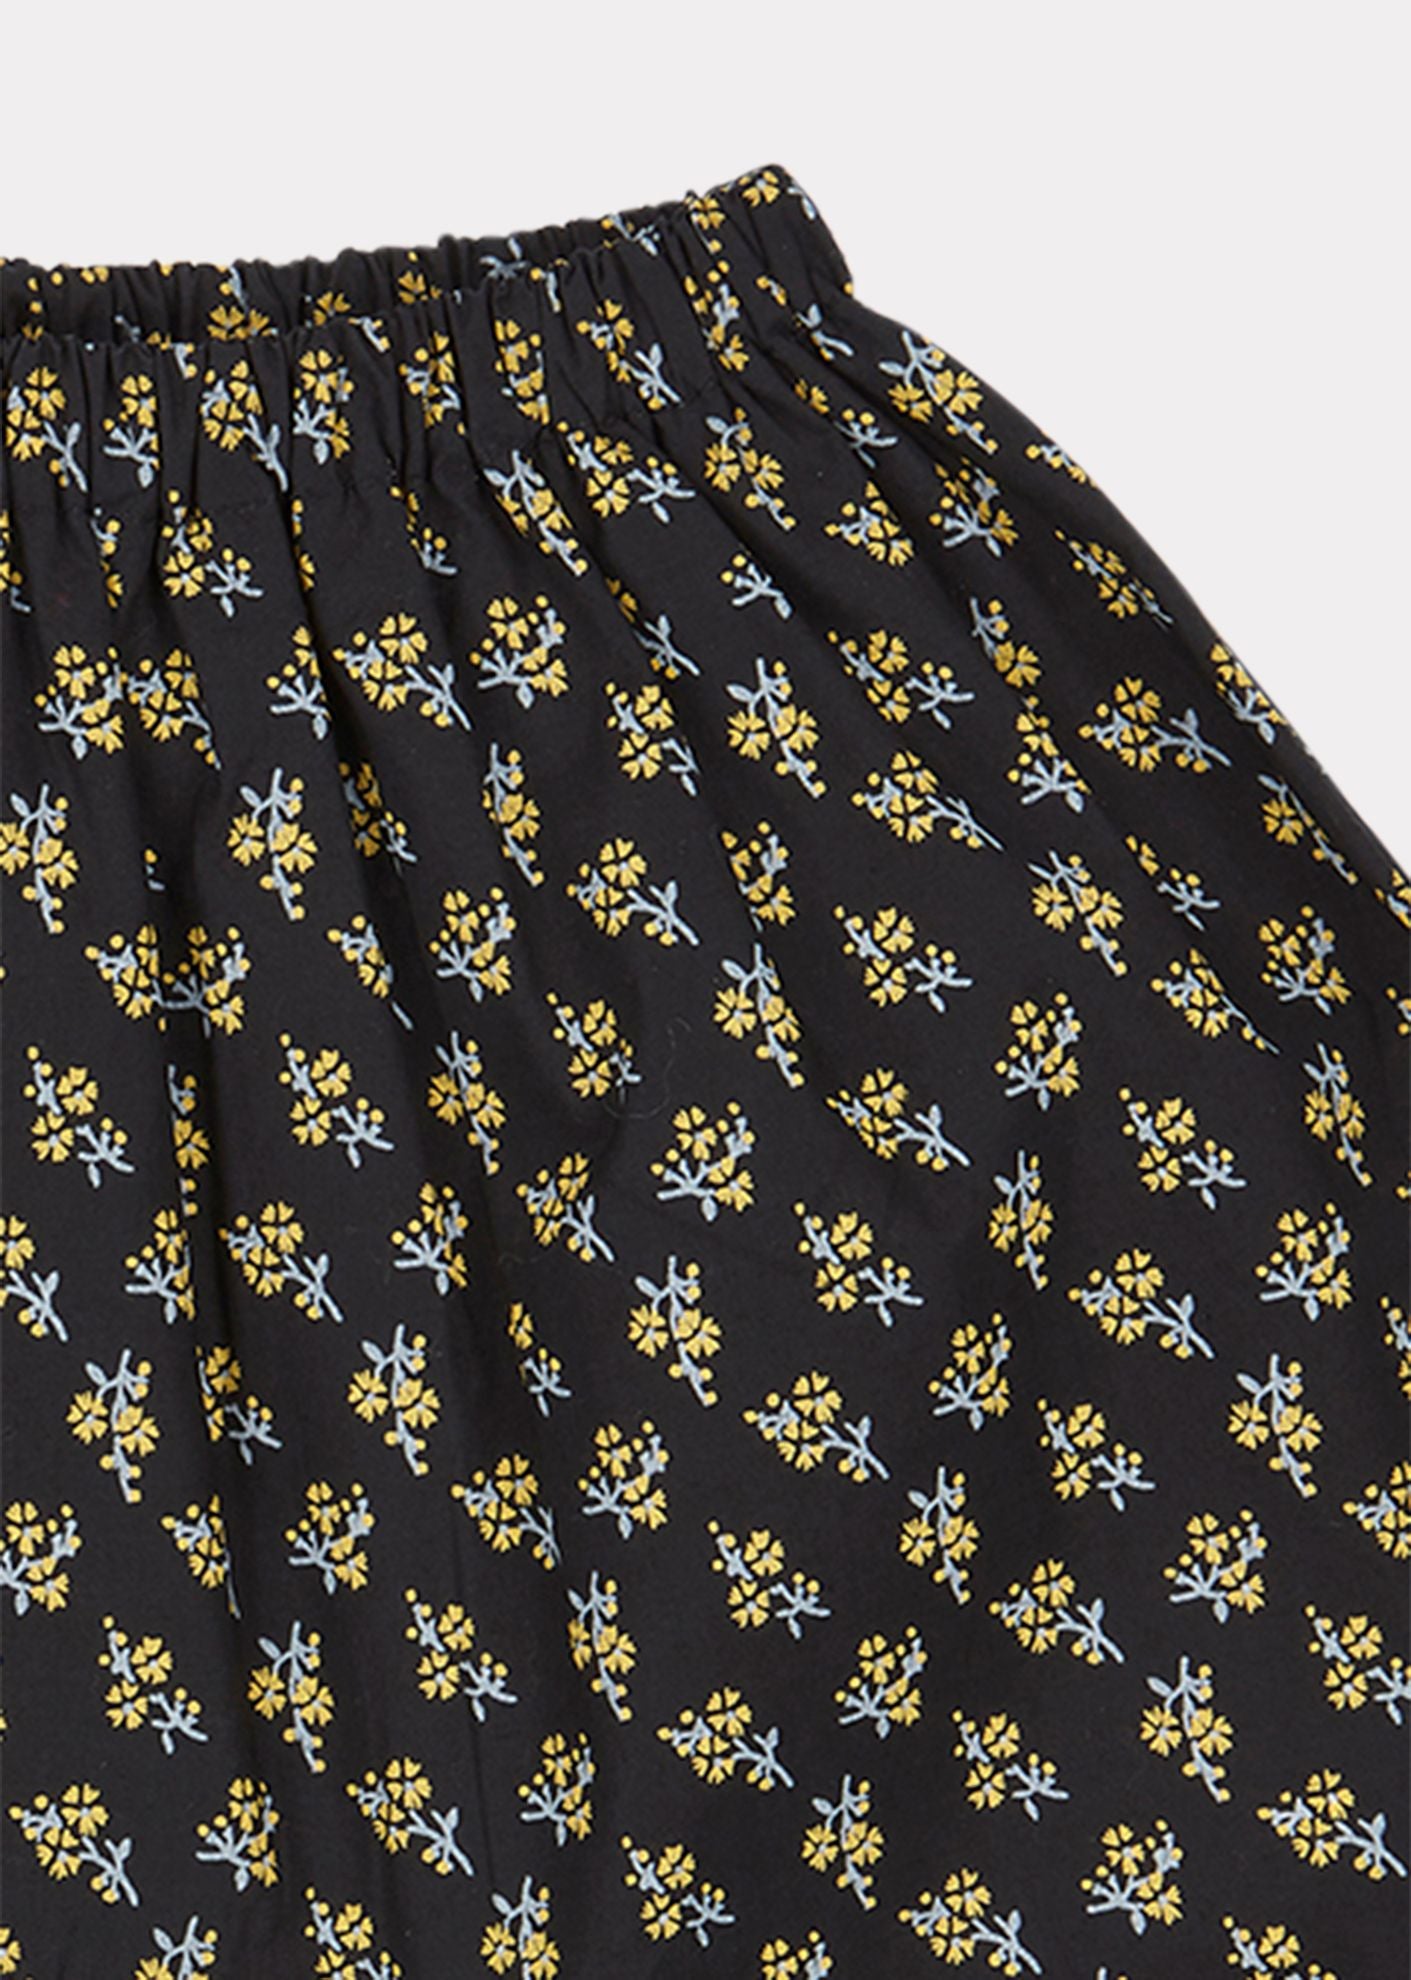 WOODPIDGEON BABY TROUSERS,BLK YELLOW SMALL FLORAL - Cémarose Canada